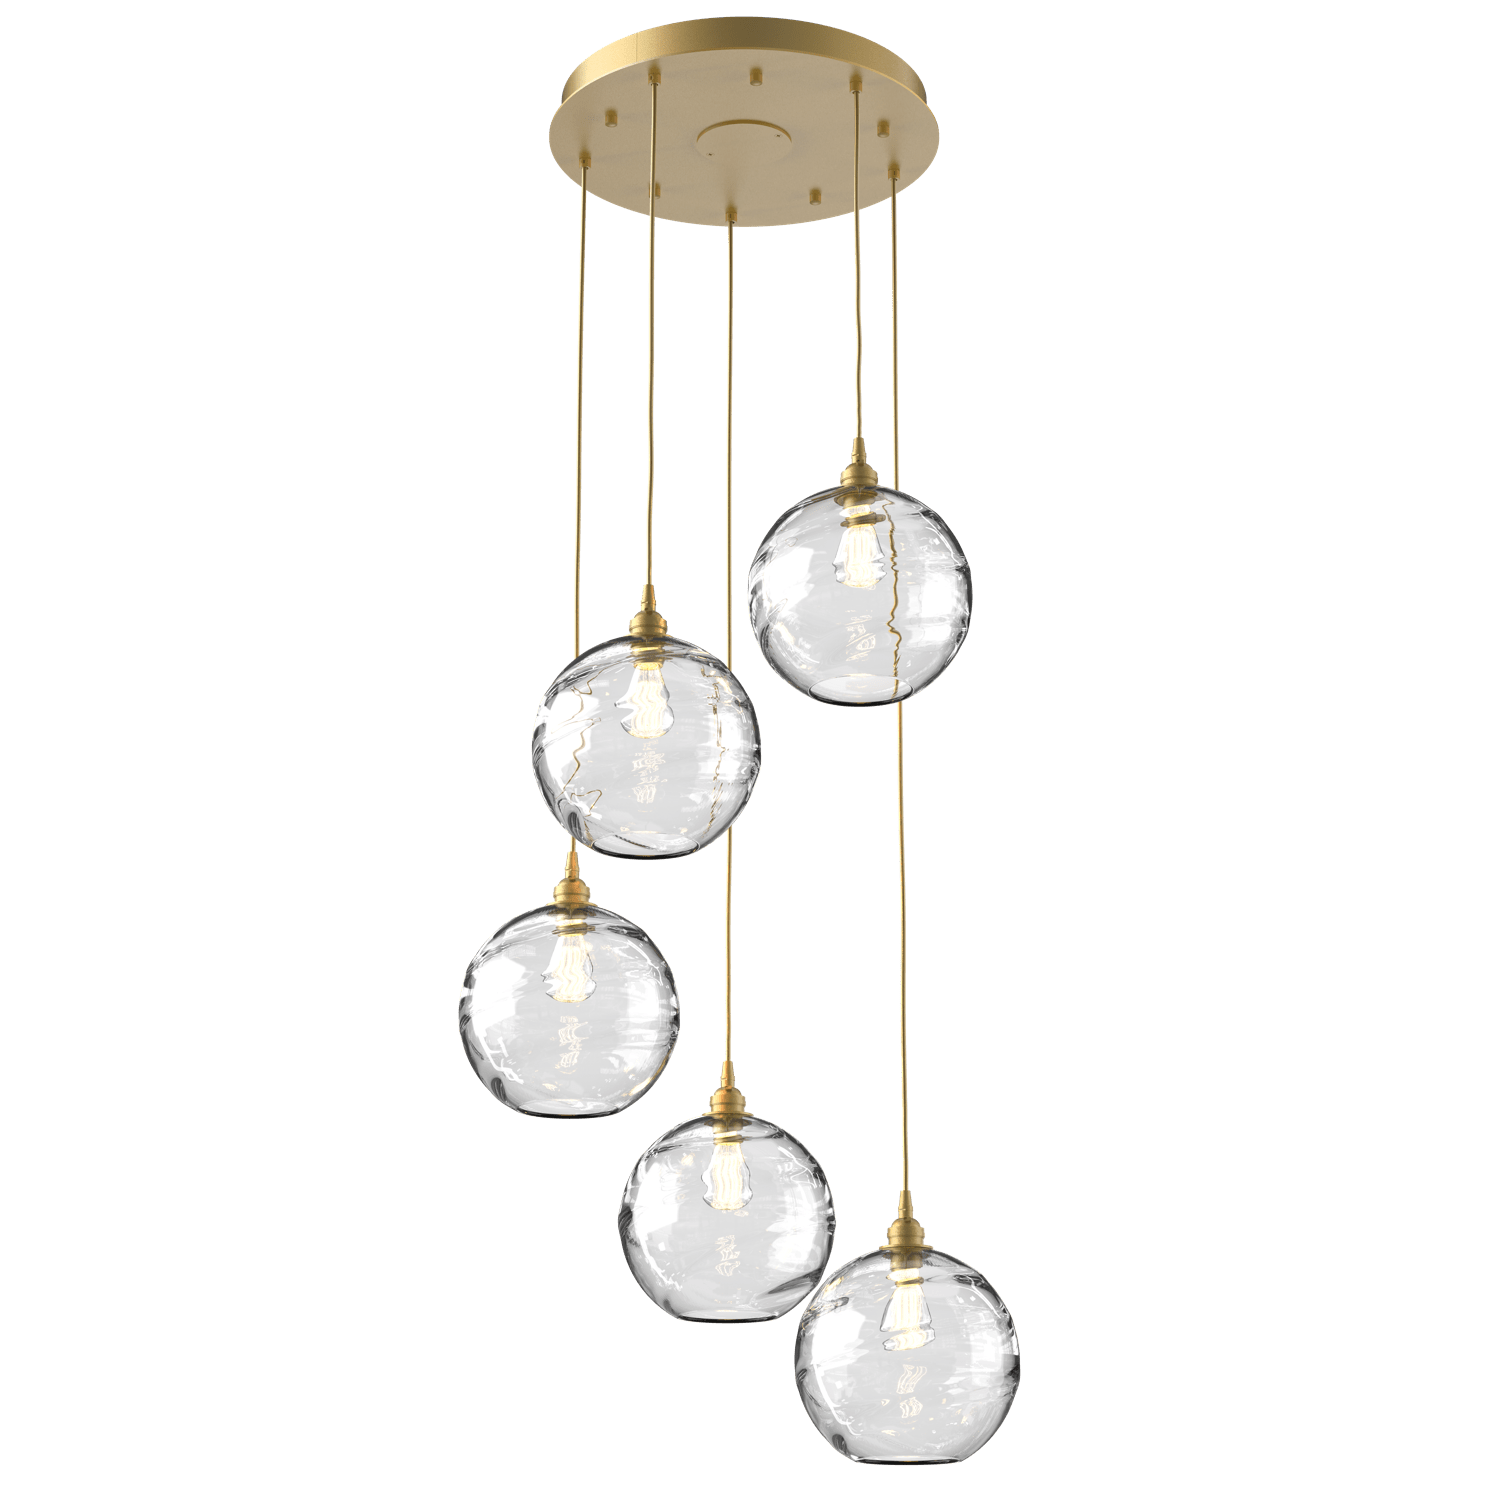 CHB0047-05-GB-OC-Hammerton-Studio-Optic-Blown-Glass-Terra-5-light-round-pendant-chandelier-with-gilded-brass-finish-and-optic-clear-blown-glass-shades-and-incandescent-lamping